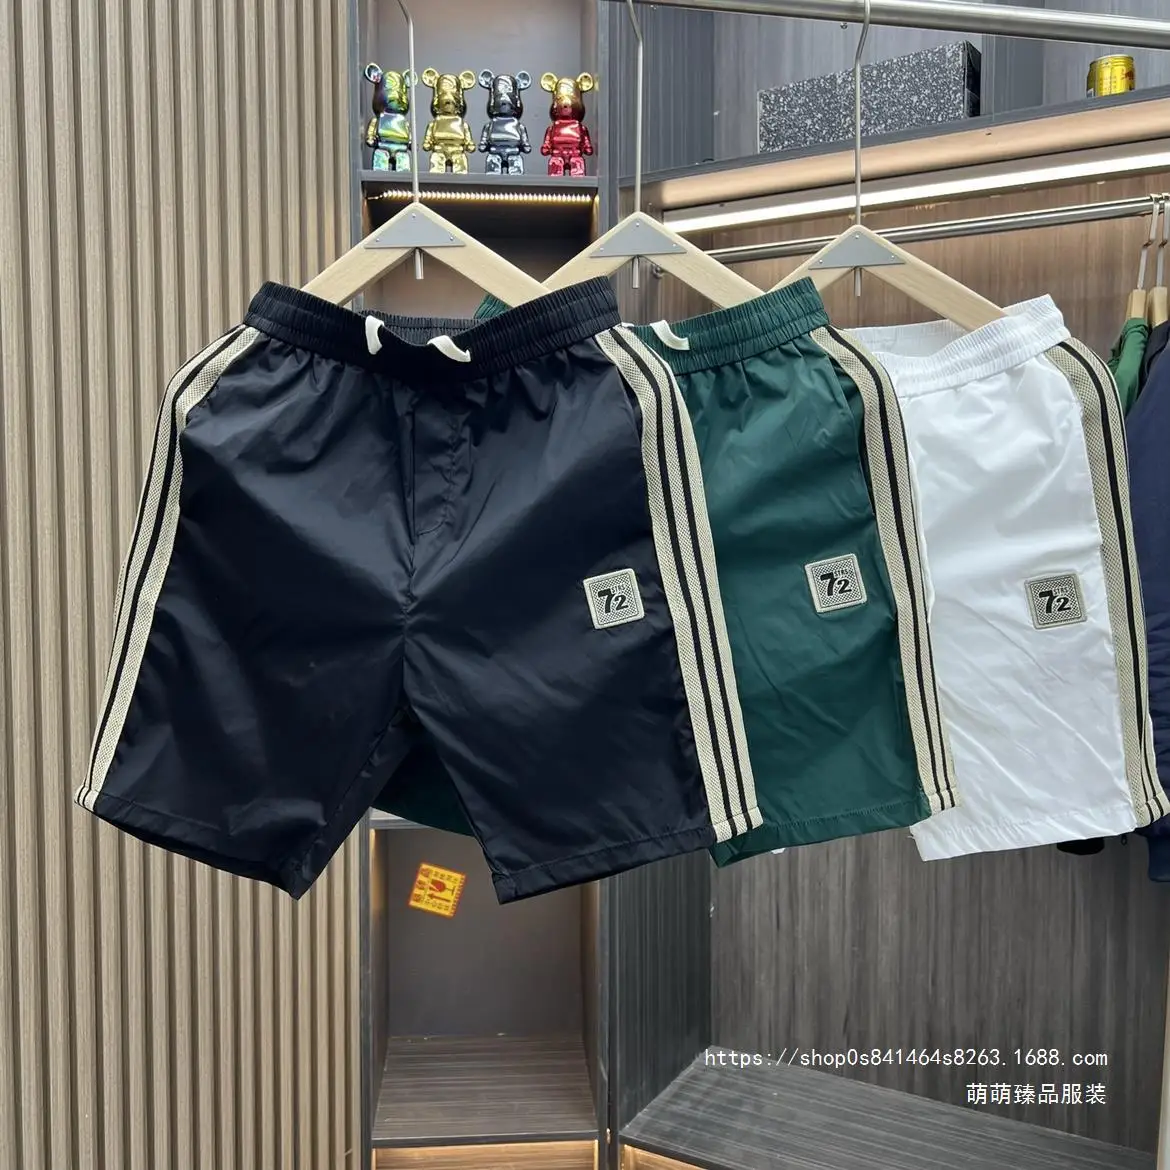 

BSDFFO men's summer new striped casual shorts Internet celebrity ruffian handsome sports five points beach